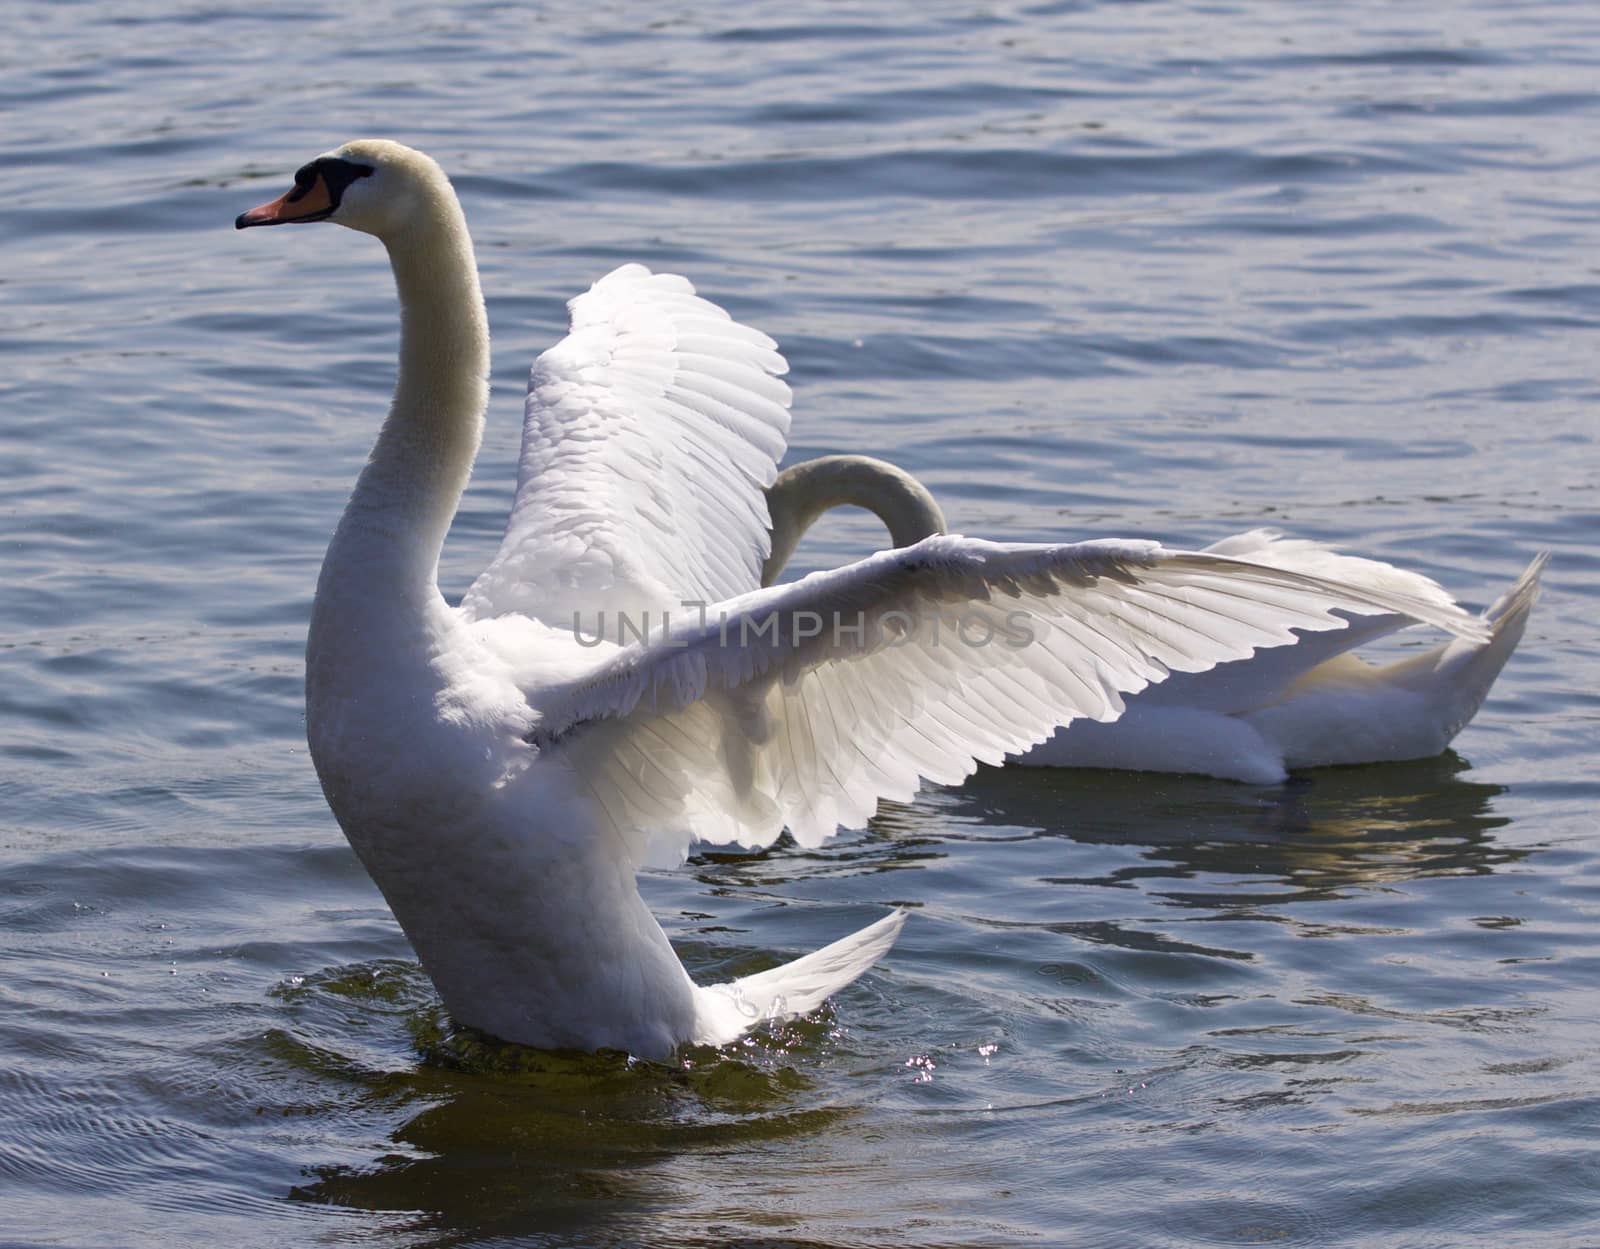 Beautiful isolated image with the swan showing his wings in the lake by teo